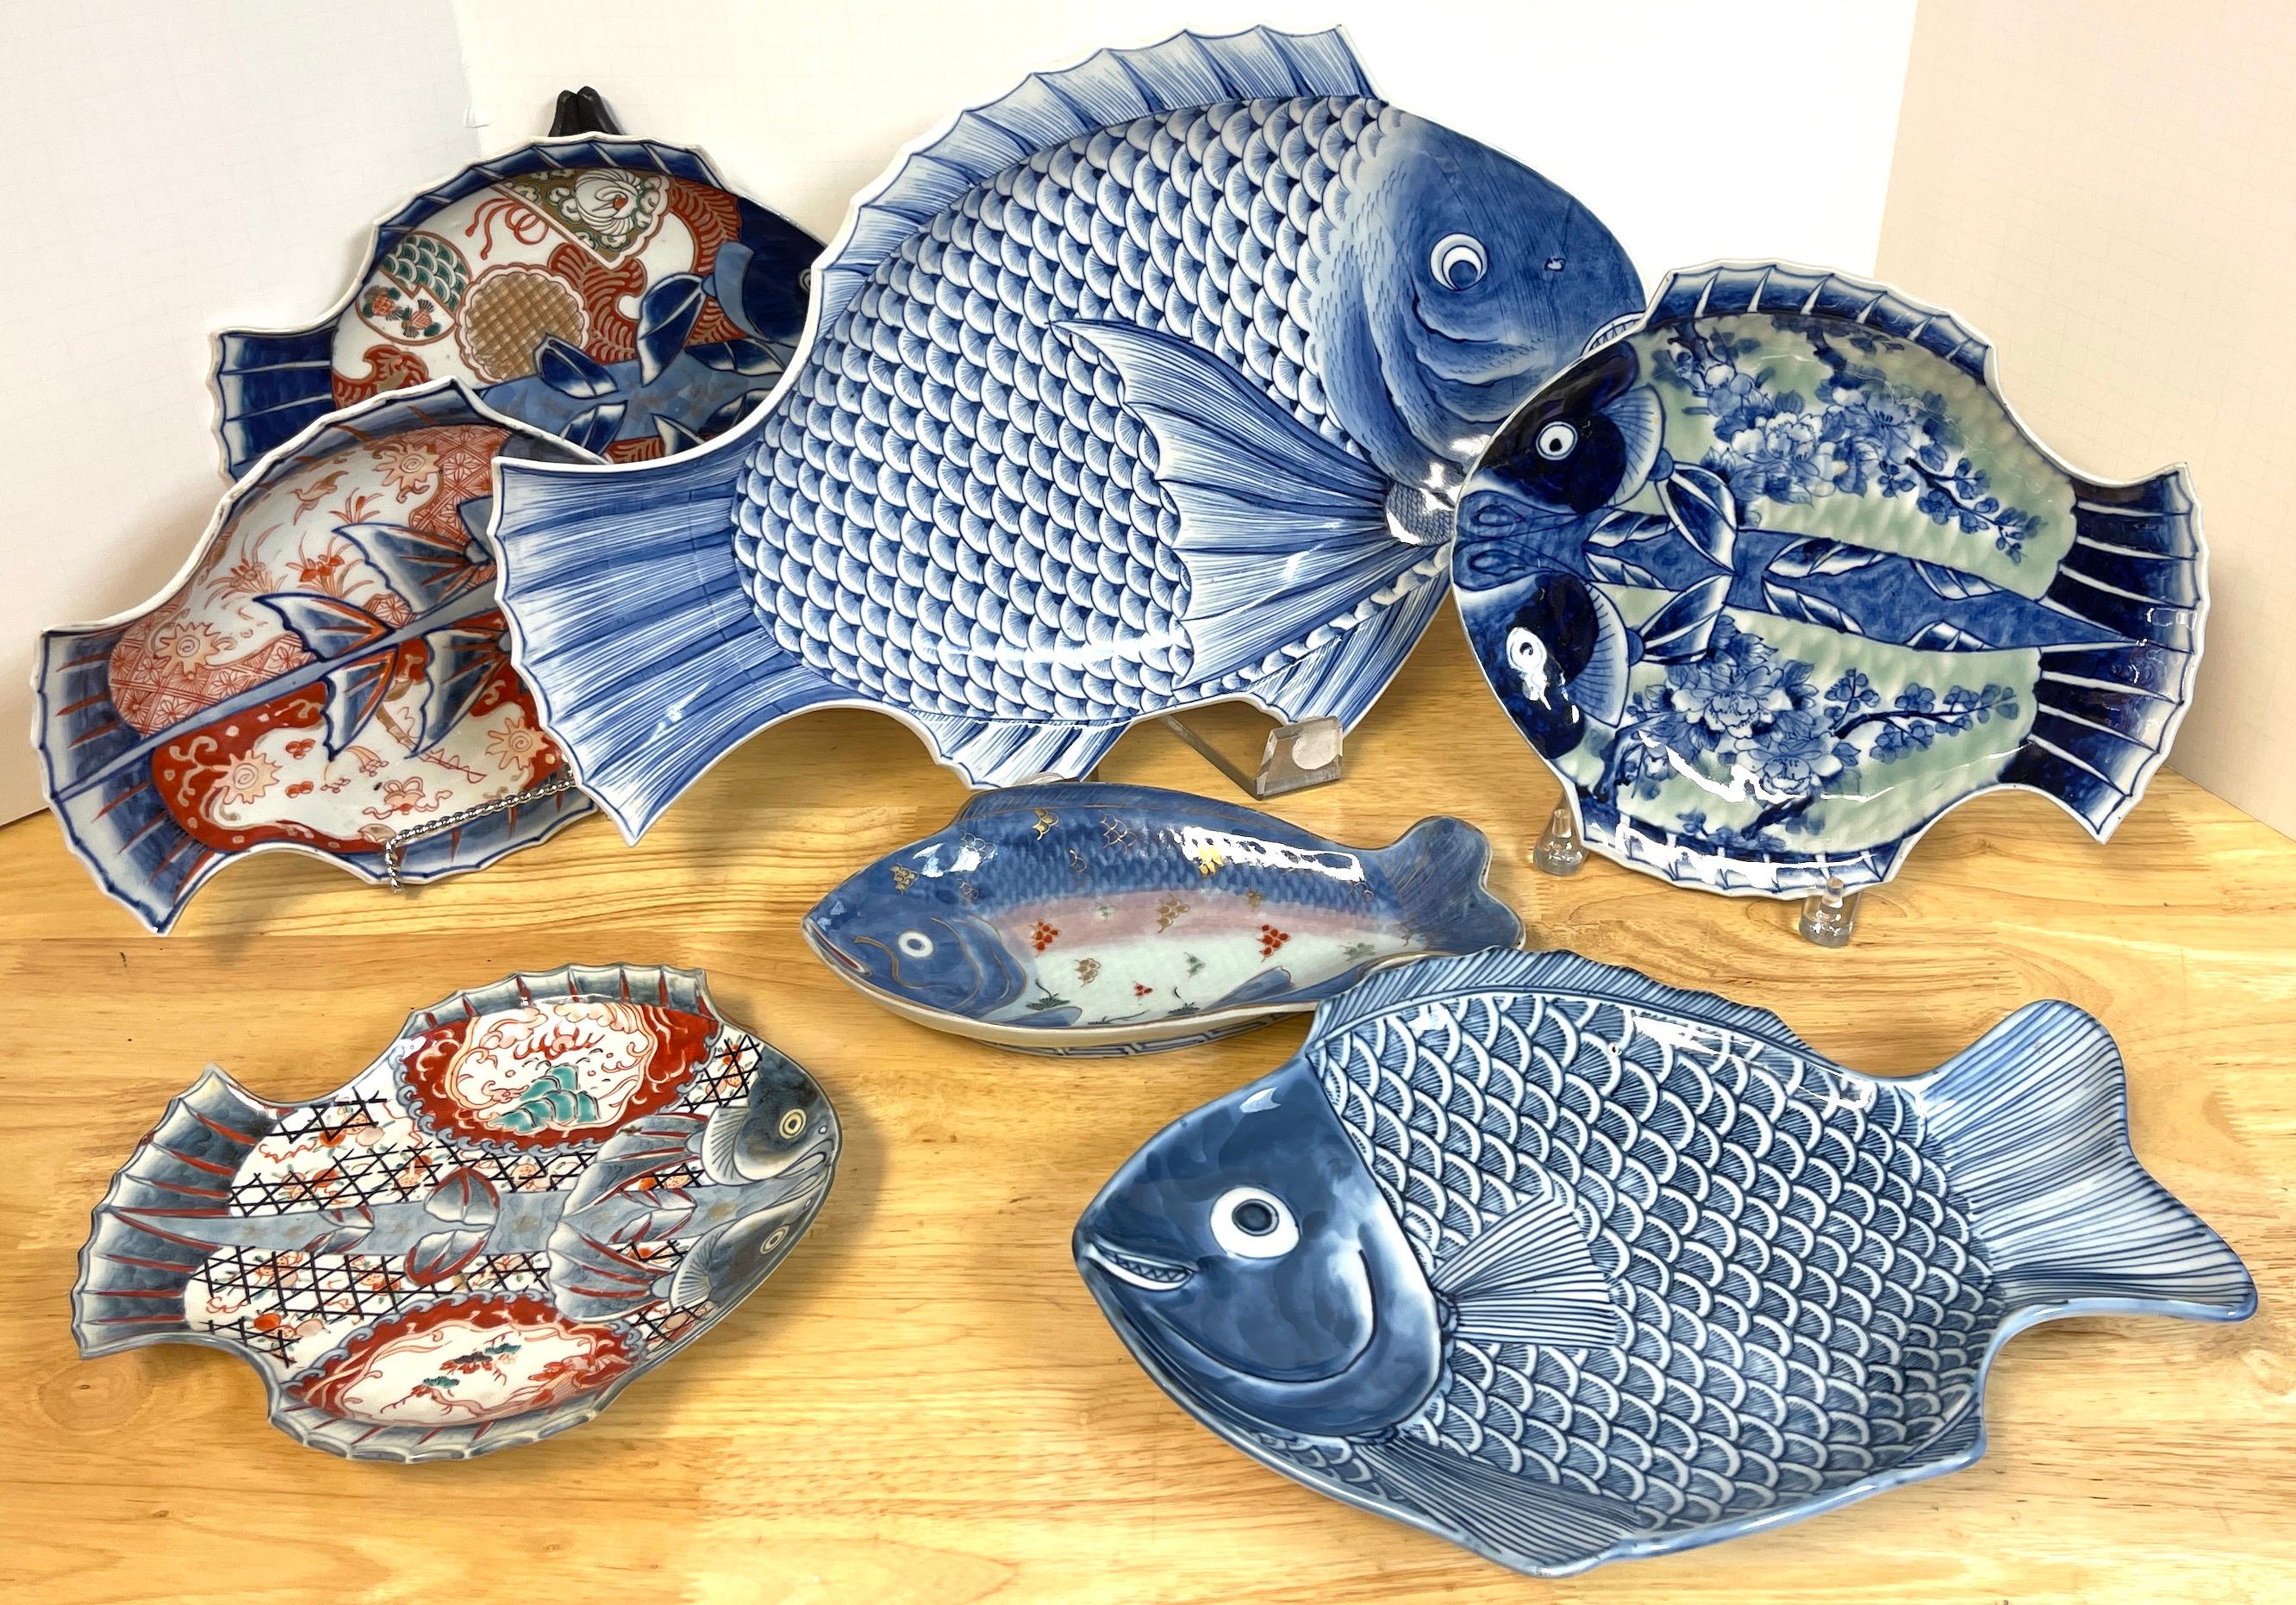 Fish plate 1 $495  9-inches wide x 8-inches high LU2592322261082
Fish plate 2 $495  9.5-Inches wide x 7.75-Inches high. LU2592322261172
Fish plate 3 $595  11-Inches wide x 9.75-Inches high. LU2592322261232
Fish plate 4 $595 11-inches wide x